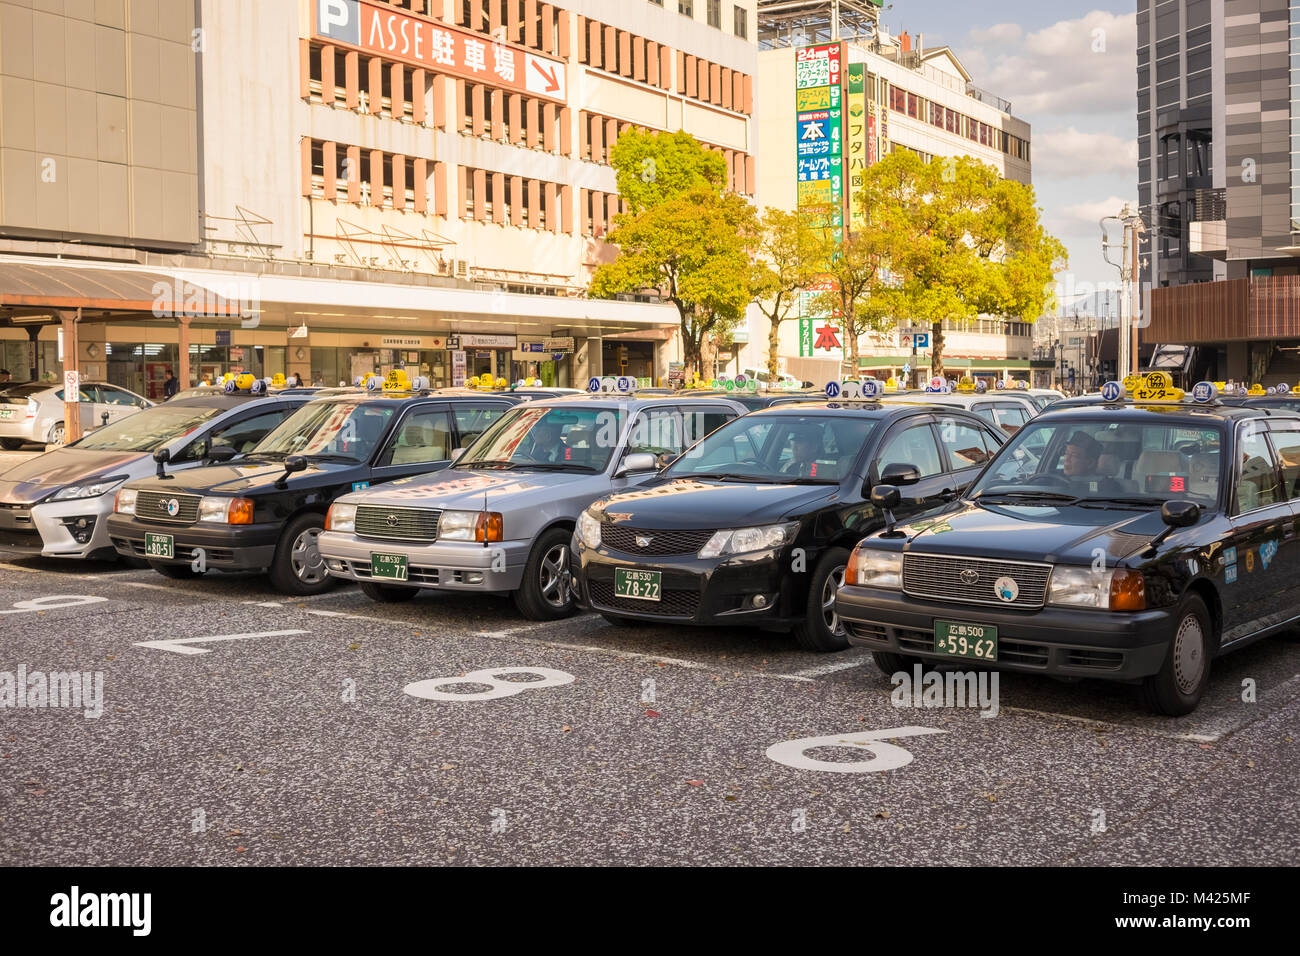 Taxis and a taxi rank in Hiroshima, Japan Stock Photo